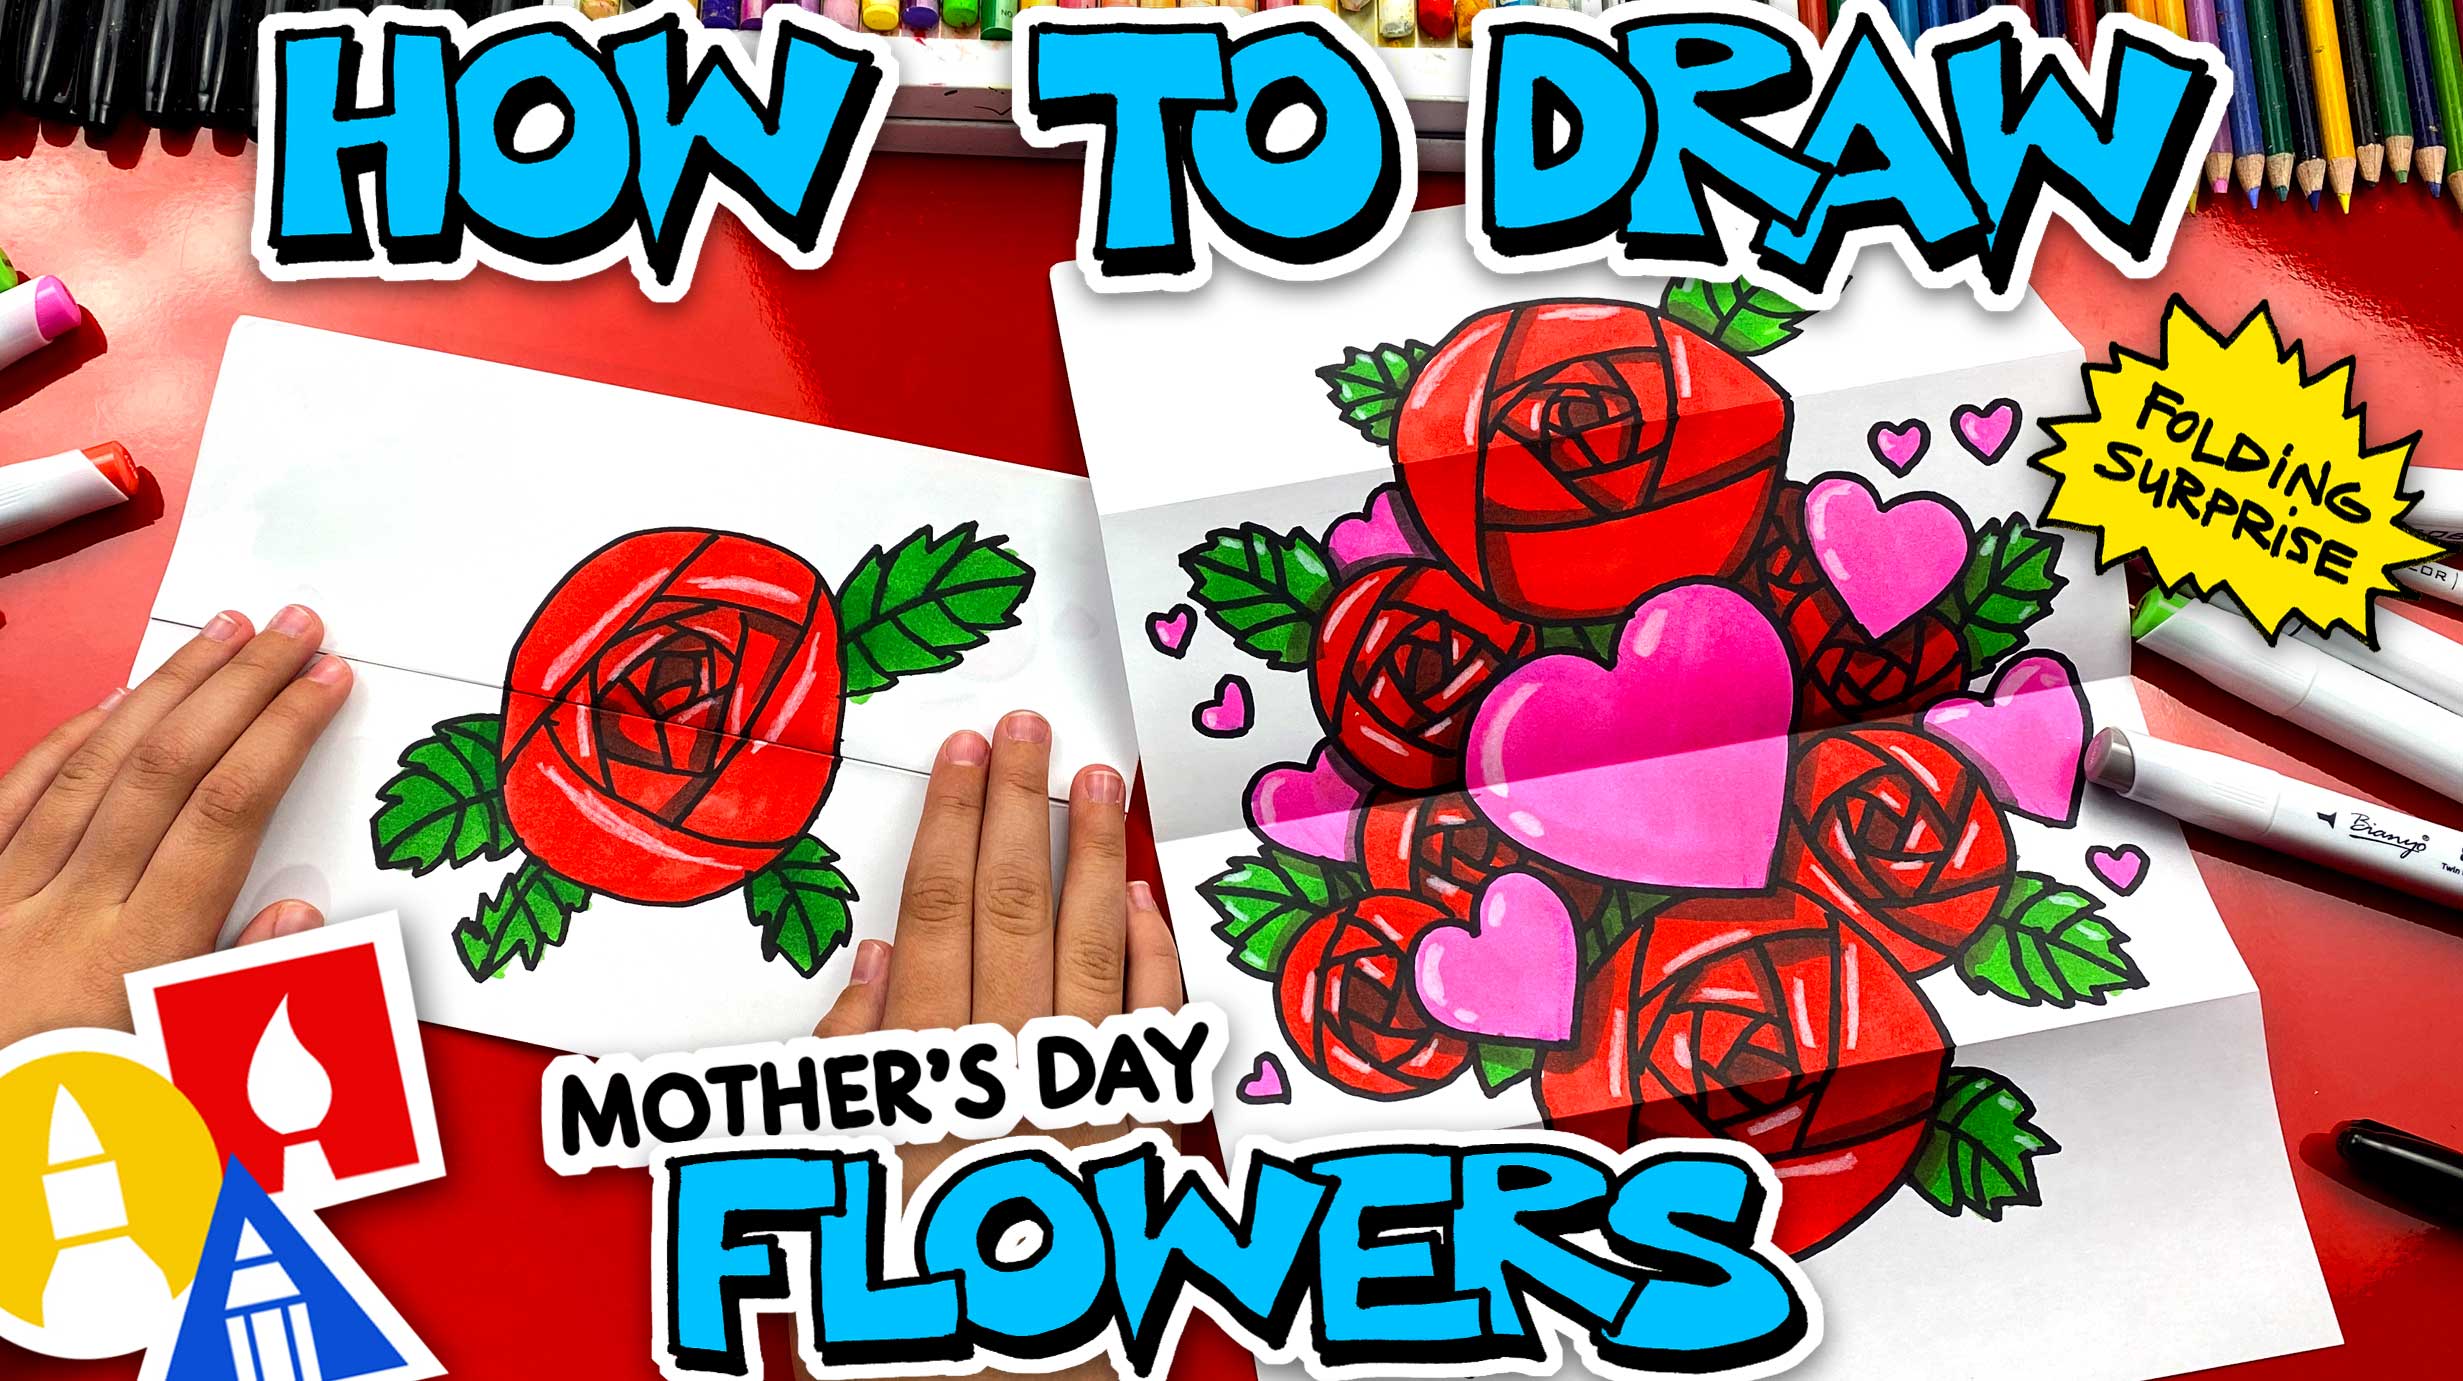 How To Draw Mother's Day Flowers Folding Surprise